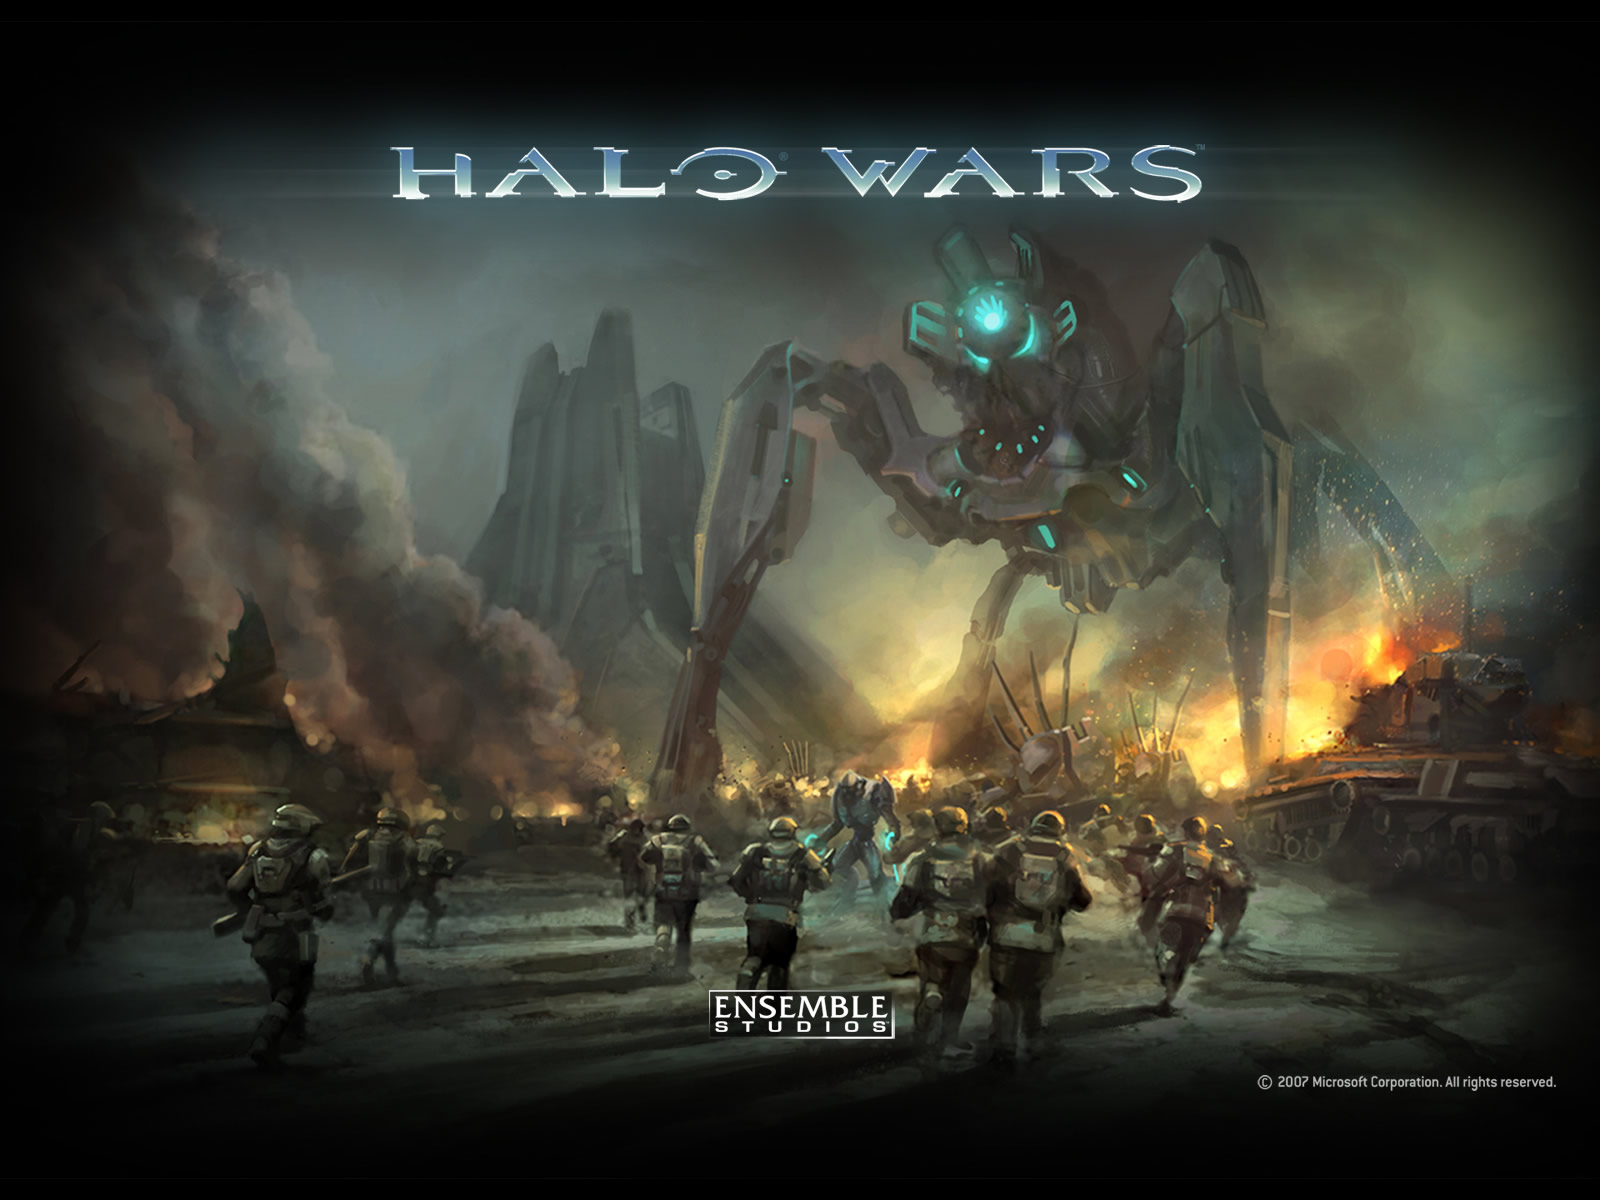 halo wars 2 wallpaper,action adventure game,pc game,strategy video game,movie,darkness